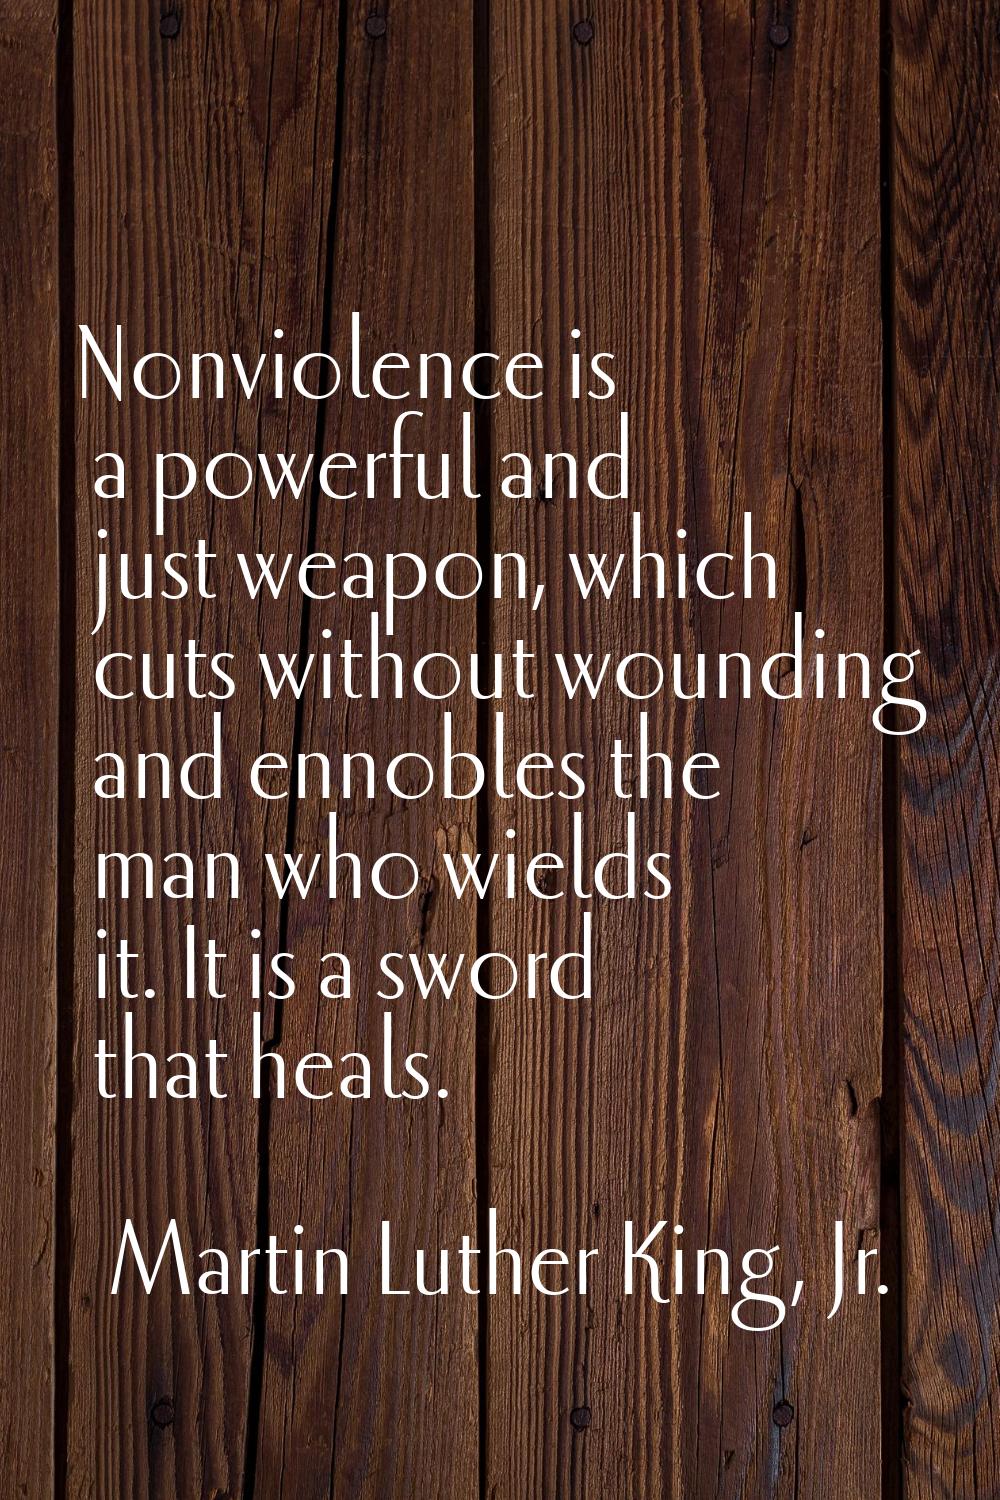 Nonviolence is a powerful and just weapon, which cuts without wounding and ennobles the man who wie